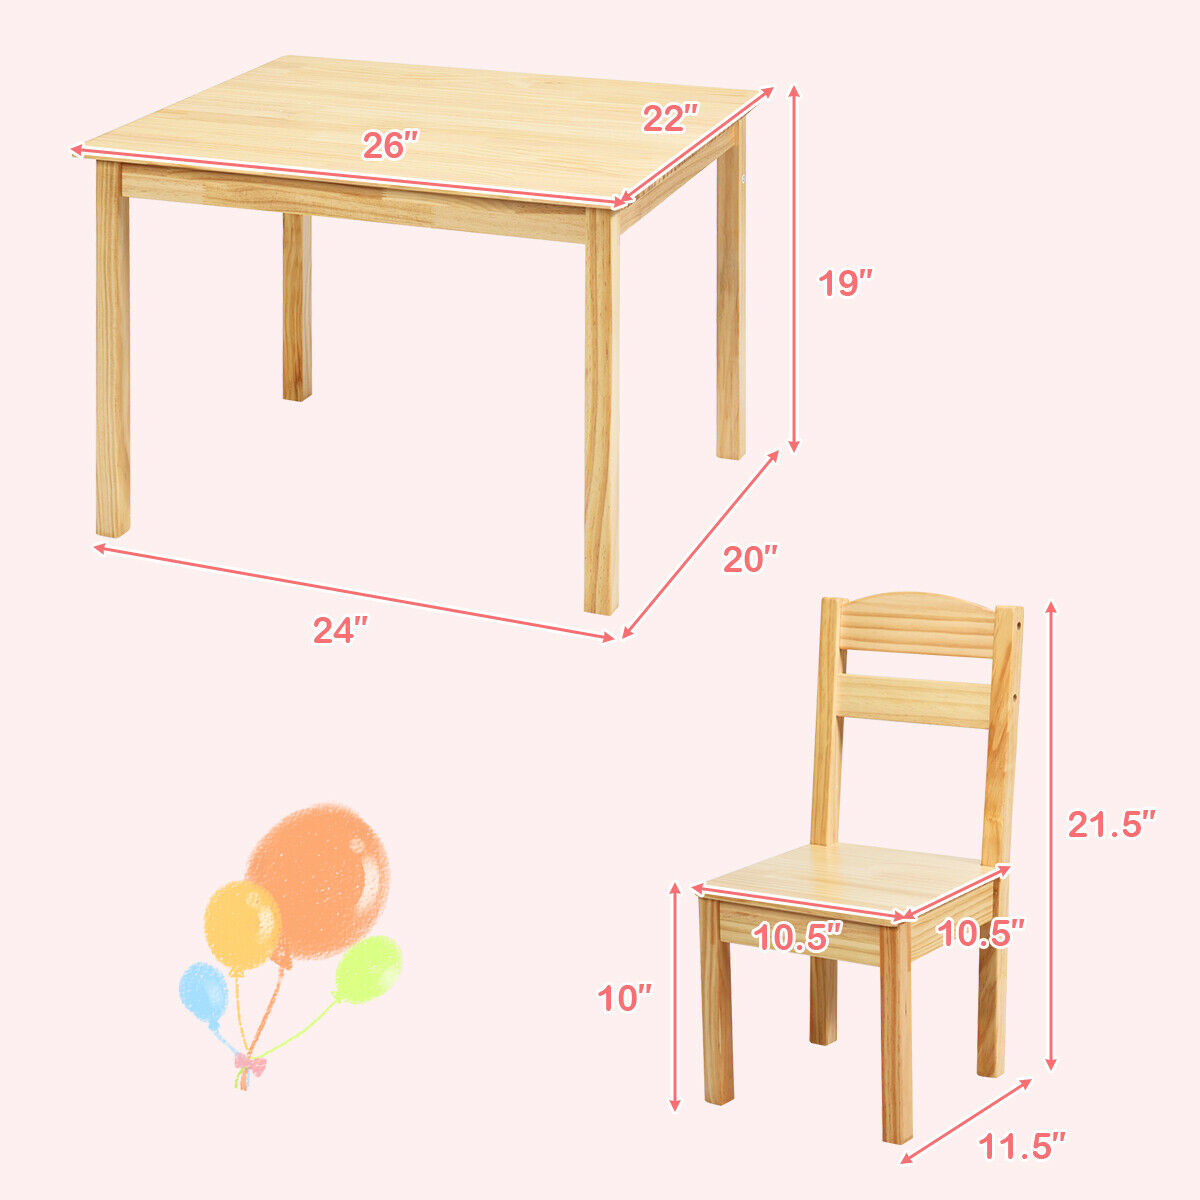 childrens wood table and chairs